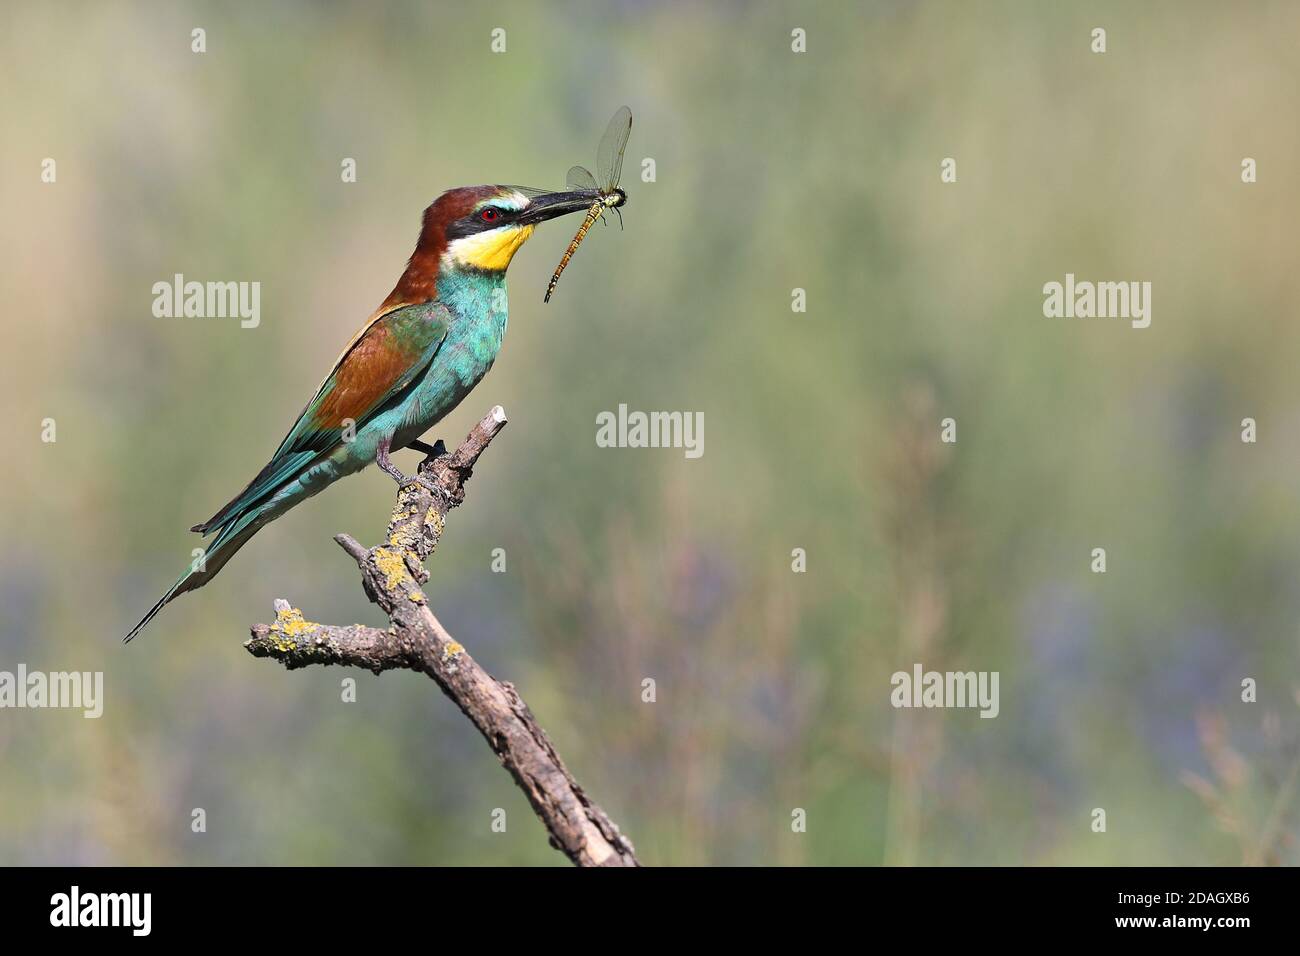 European bee eater (Merops apiaster), perching on a branch with a dragonfly in the beak, Hungary, Kiskunsag National Park Stock Photo